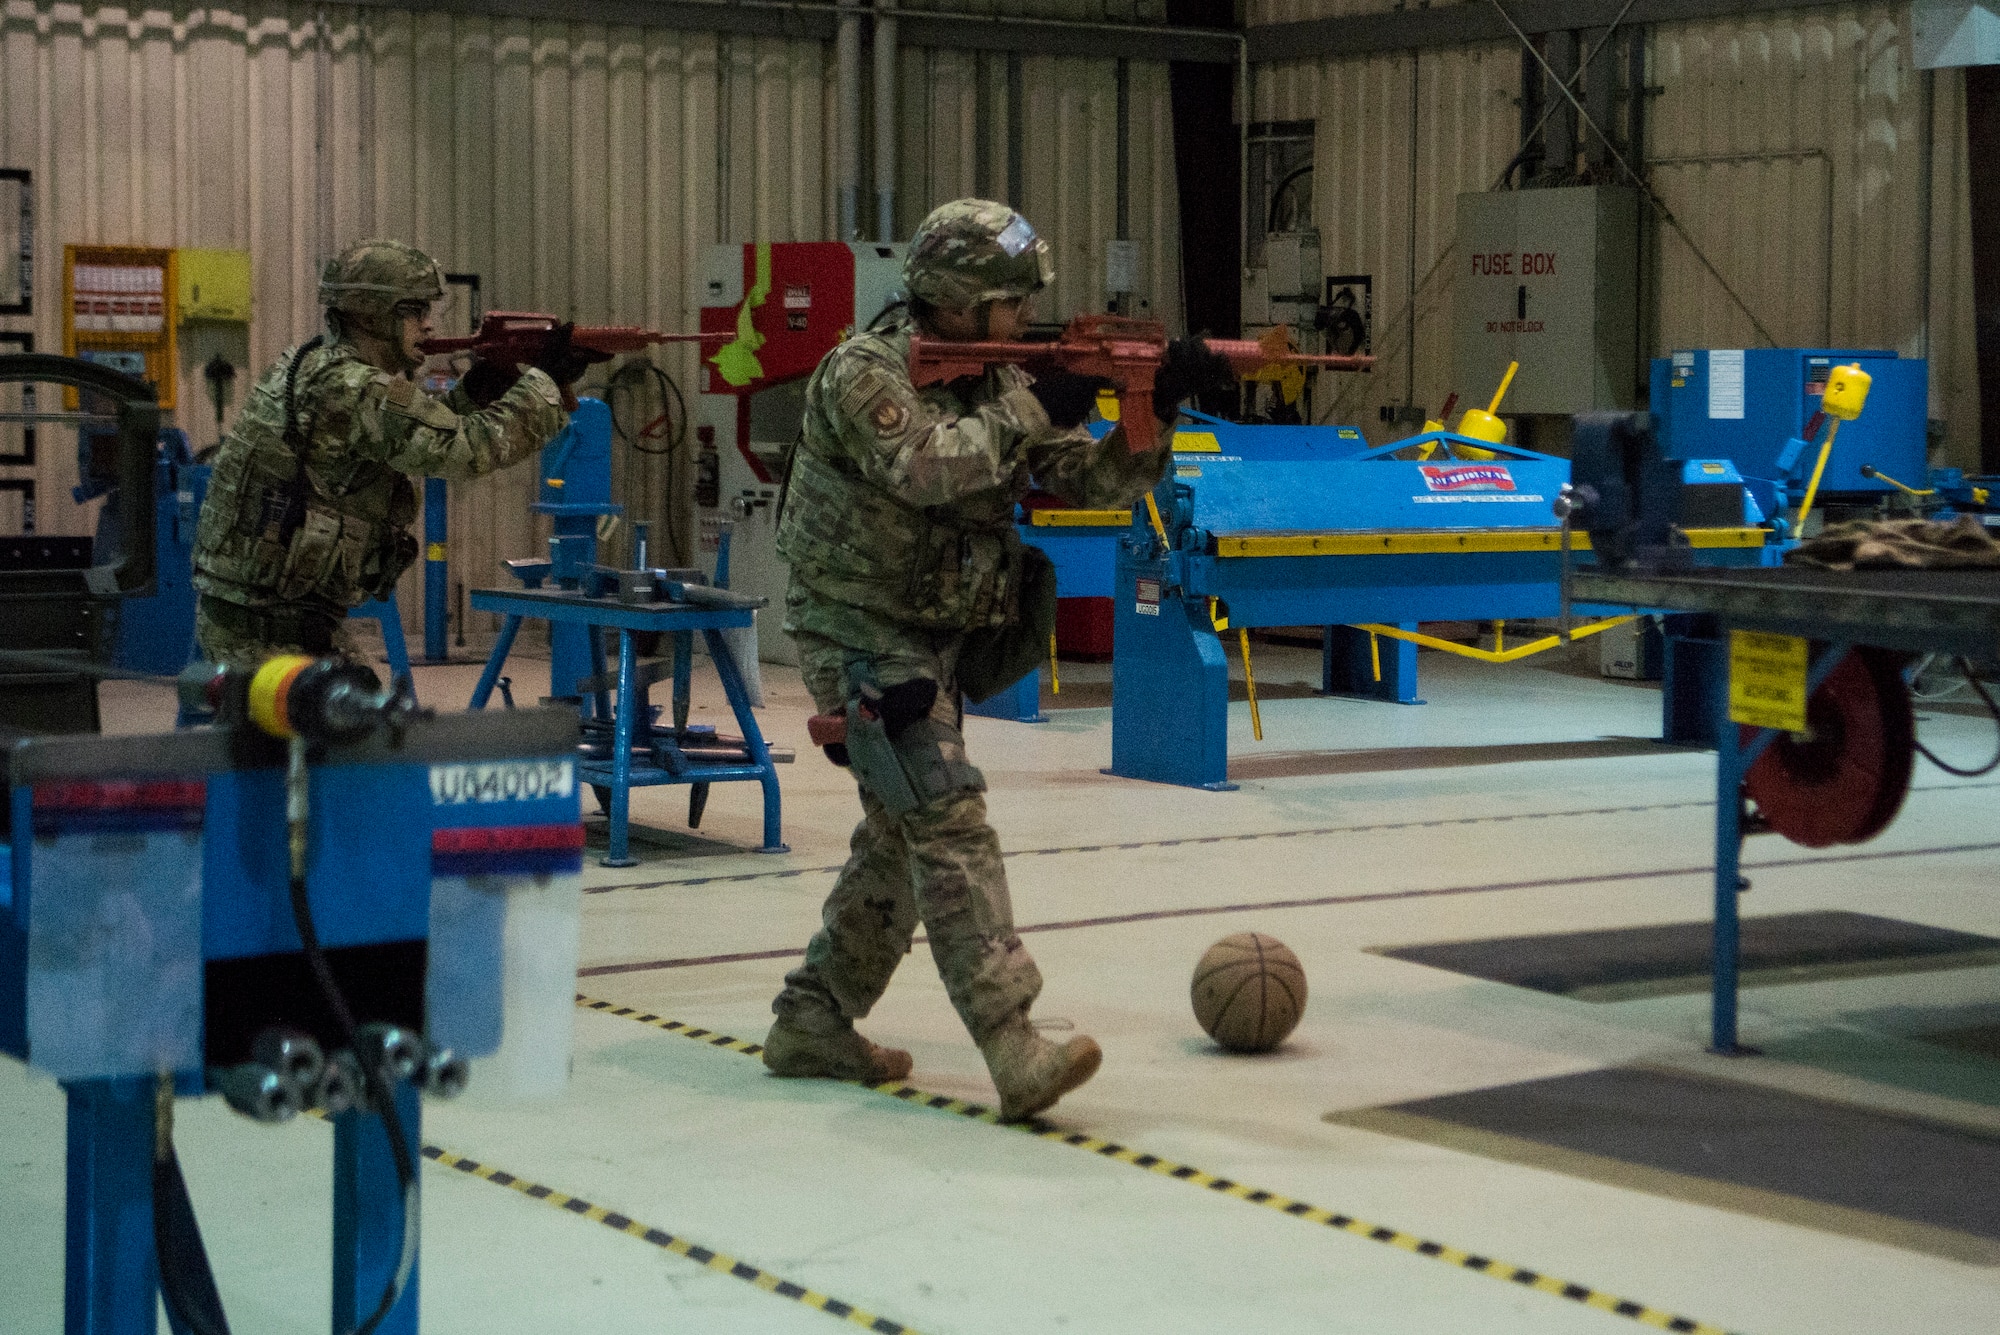 Ramstein hosted Exercise Operation Varsity 19-01, a week-long exercise testing the response capability of multiple base agencies.